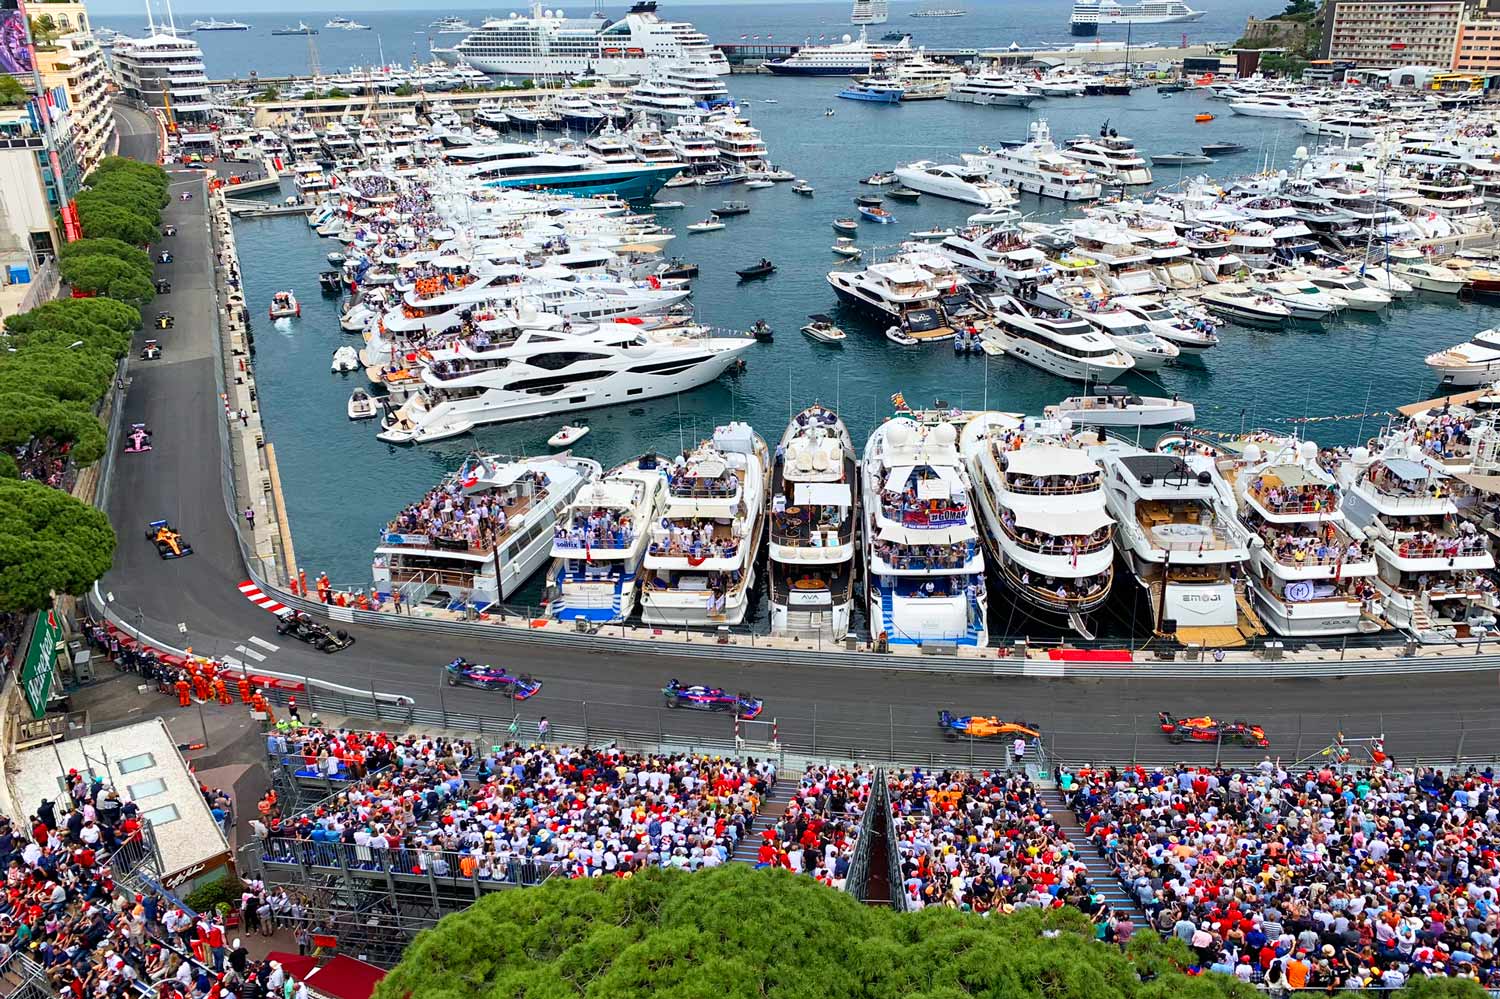 What It Costs To Moor A Superyacht At The Monaco Grand Prix